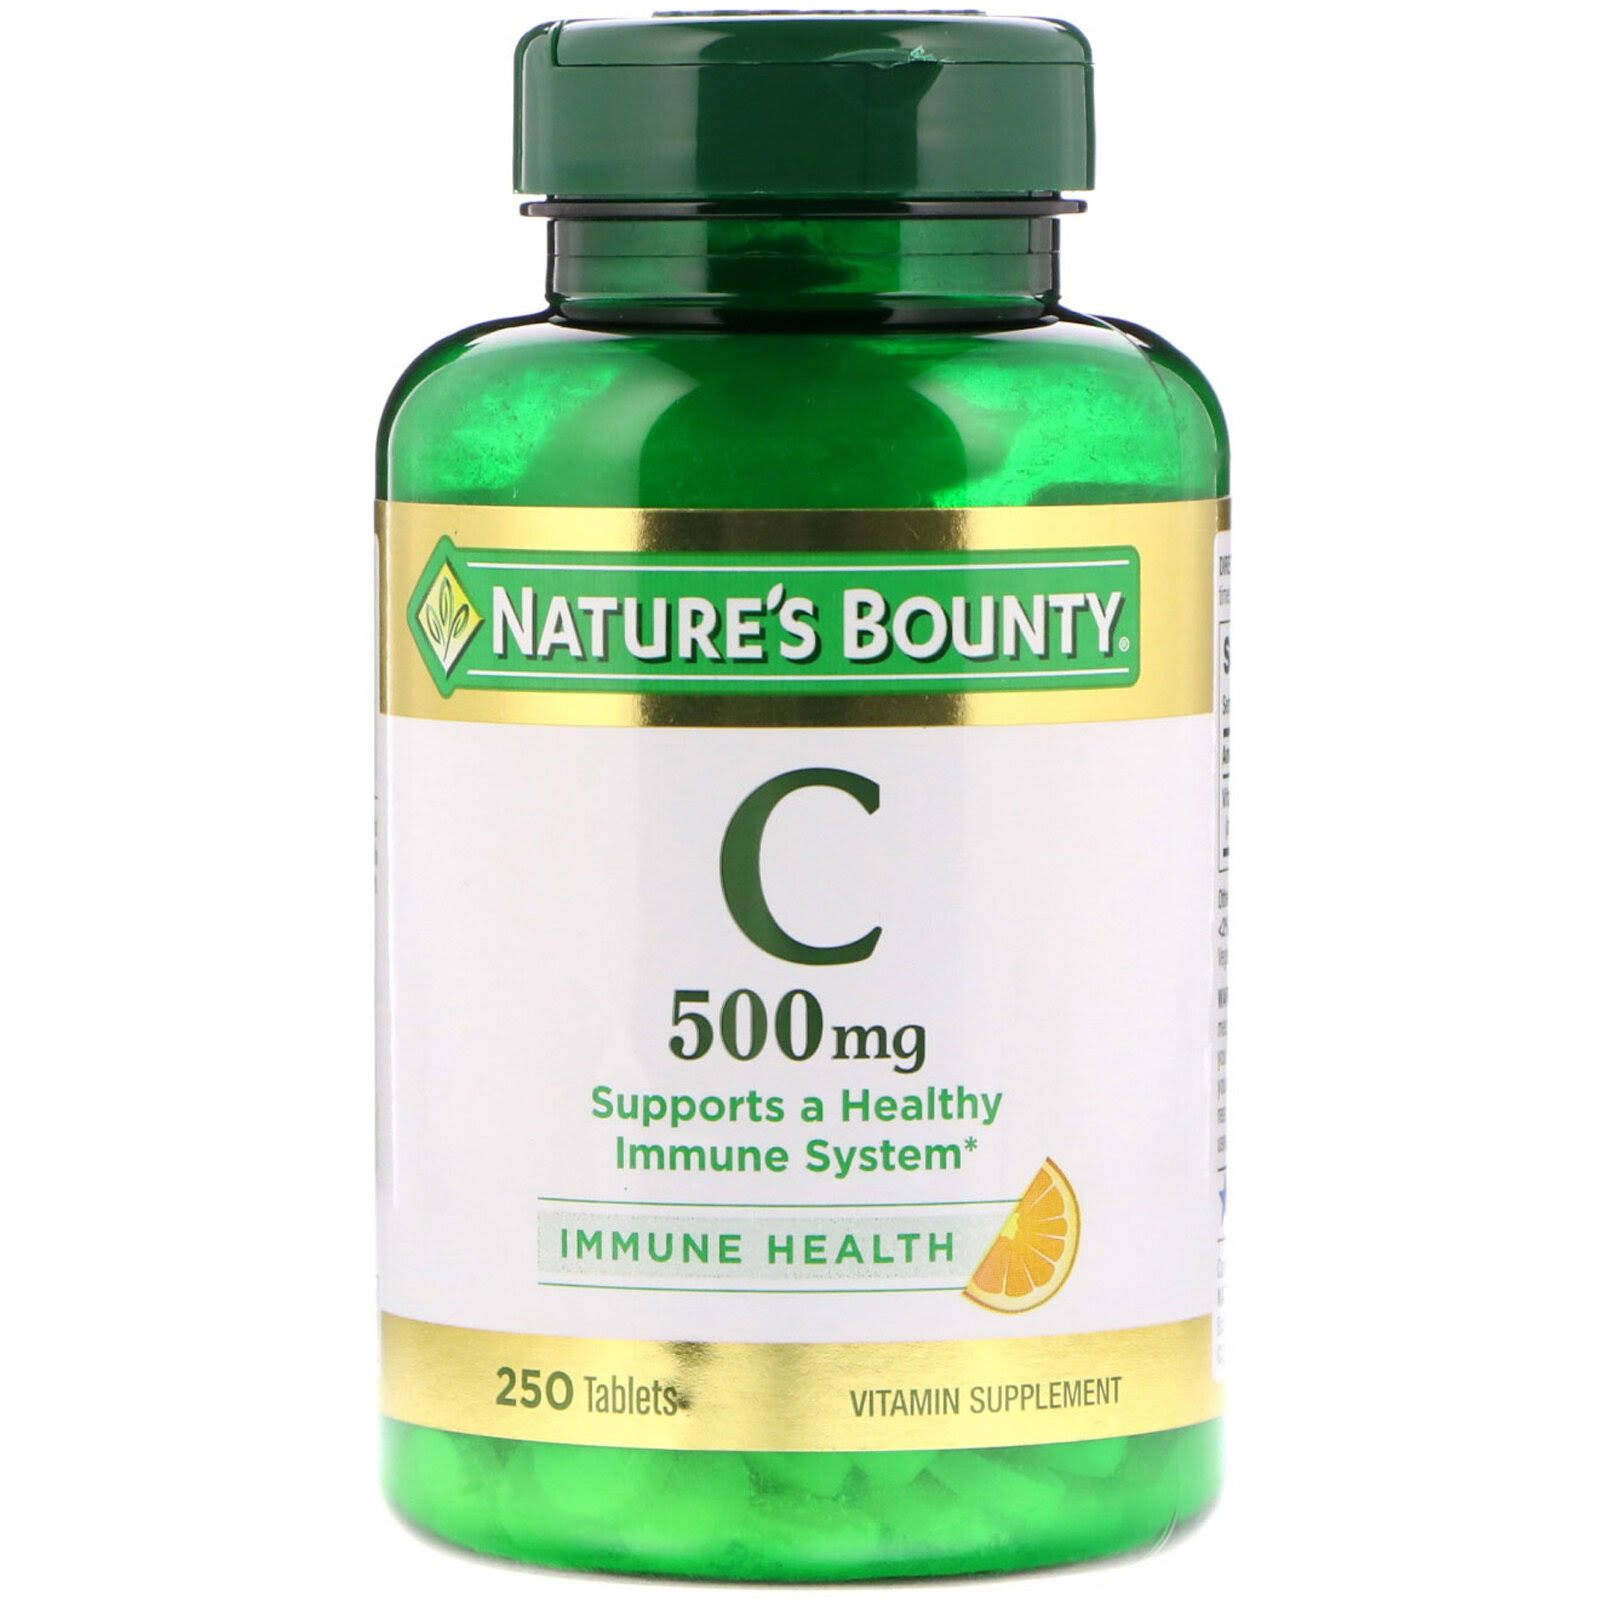 Nature's Bounty Vitamin-C 500mg Dietary Supplement - 250 Tablets